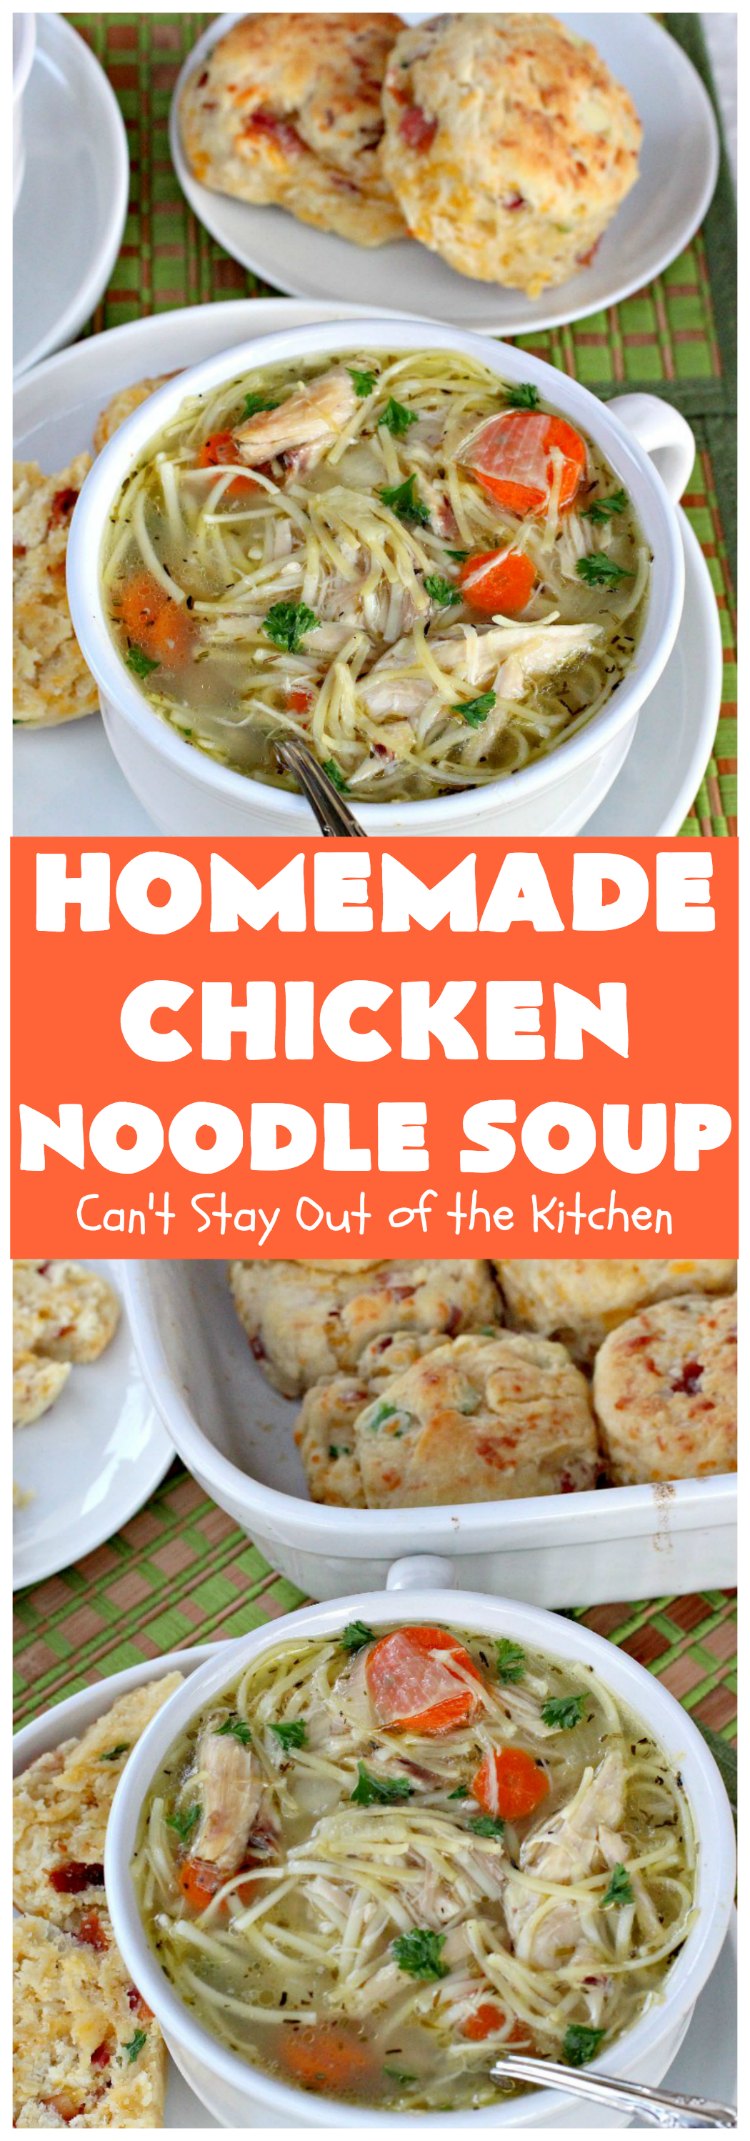 Homemade Chicken Noodle Soup | Can't Stay Out of the Kitchen